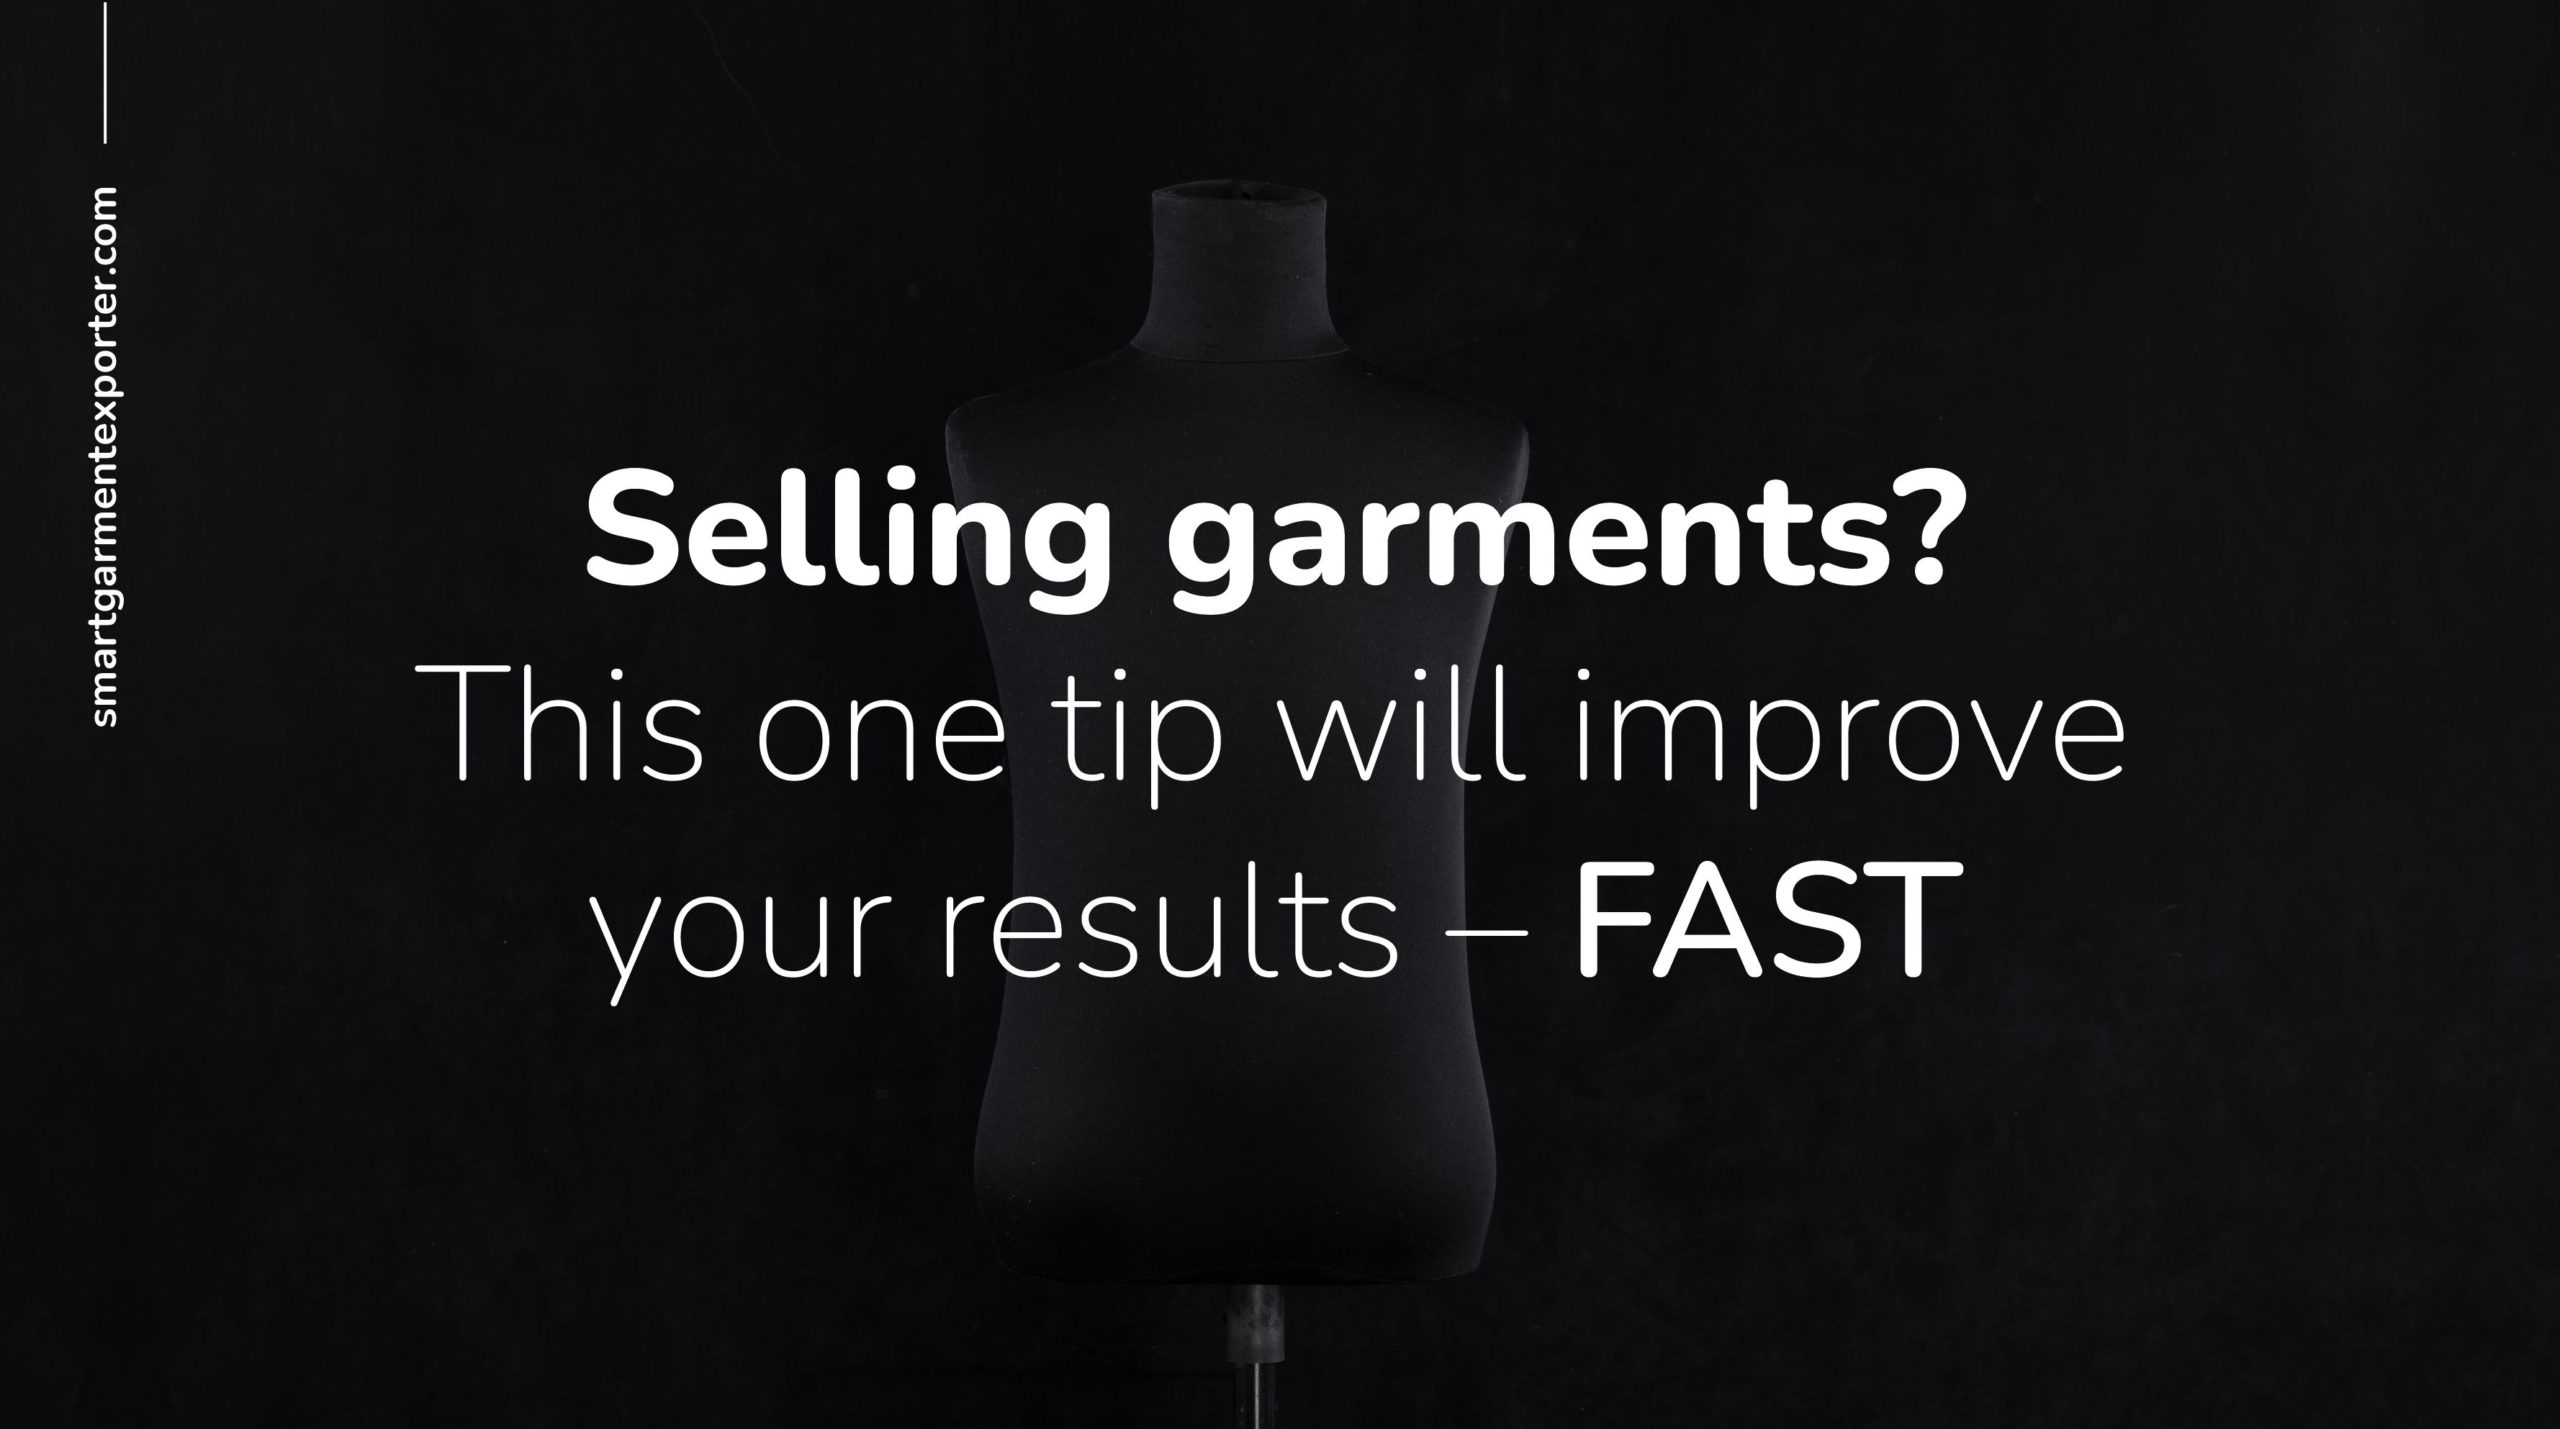 Selling garments? This one tip will improve your results – FAST